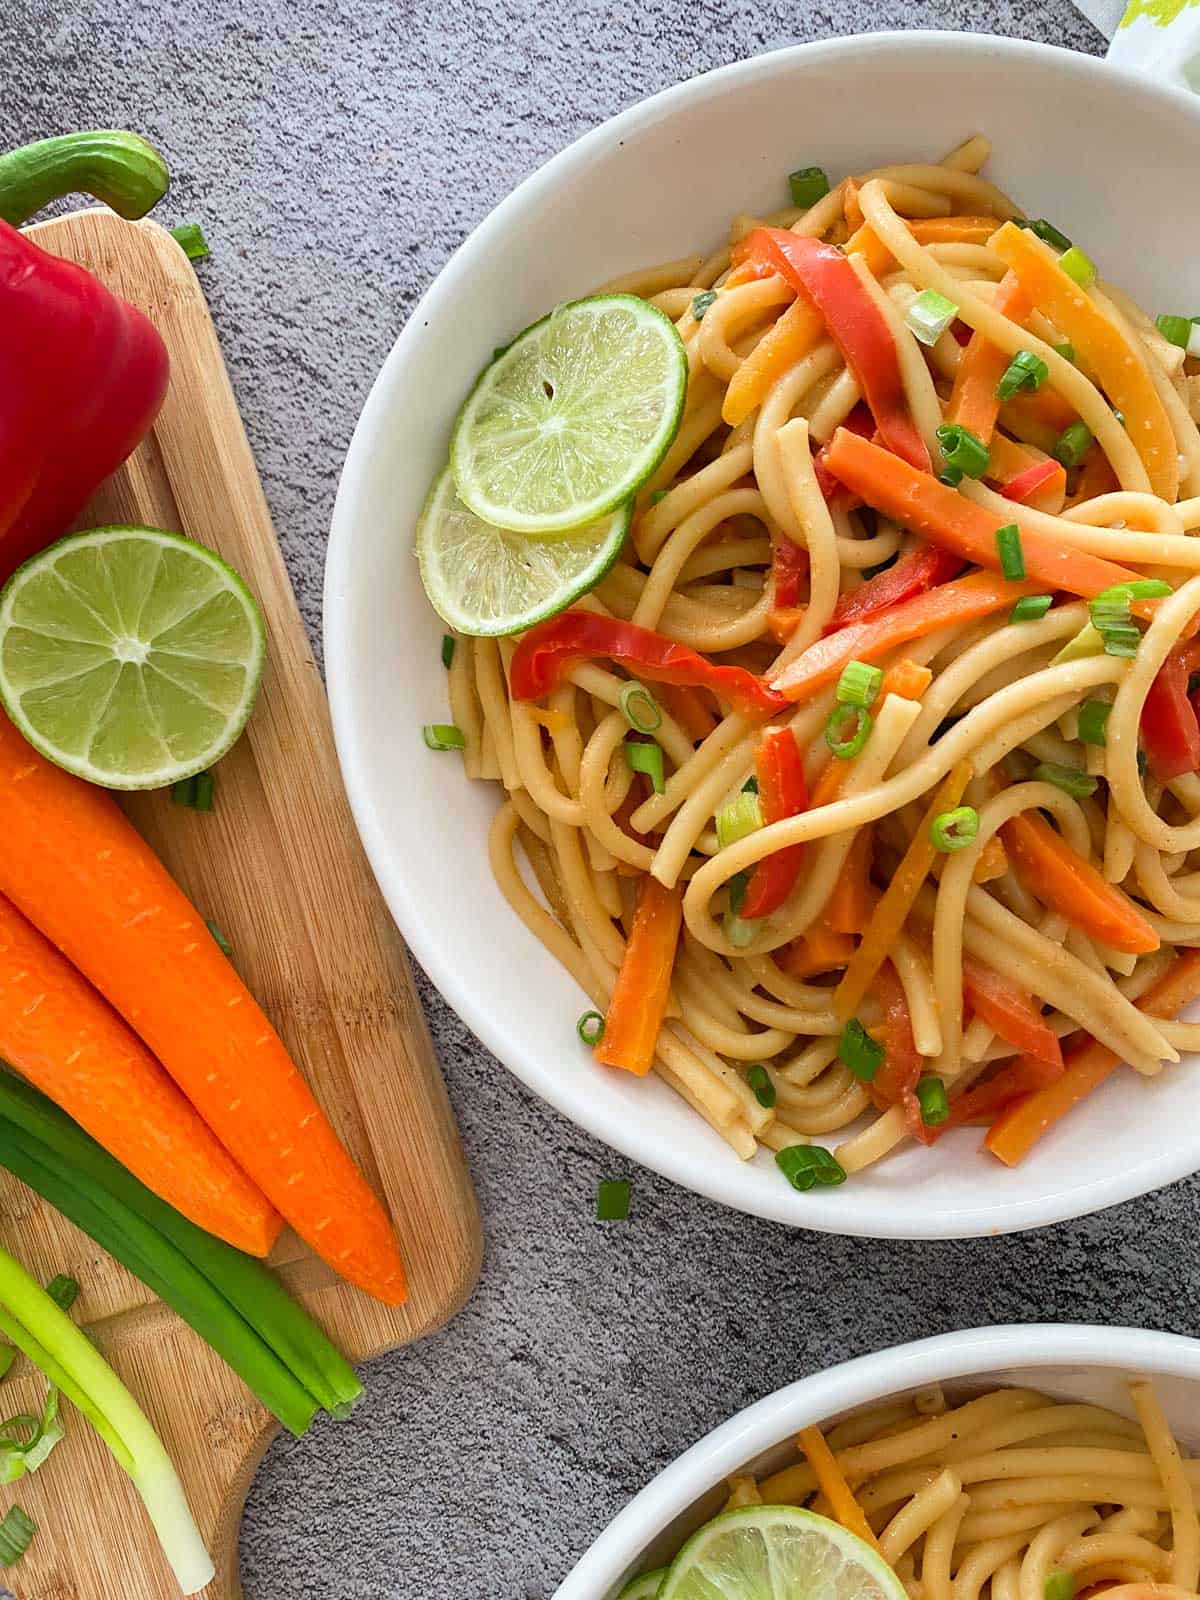 White bowl of noodles, carrots and peppers with lime wedge garnish.